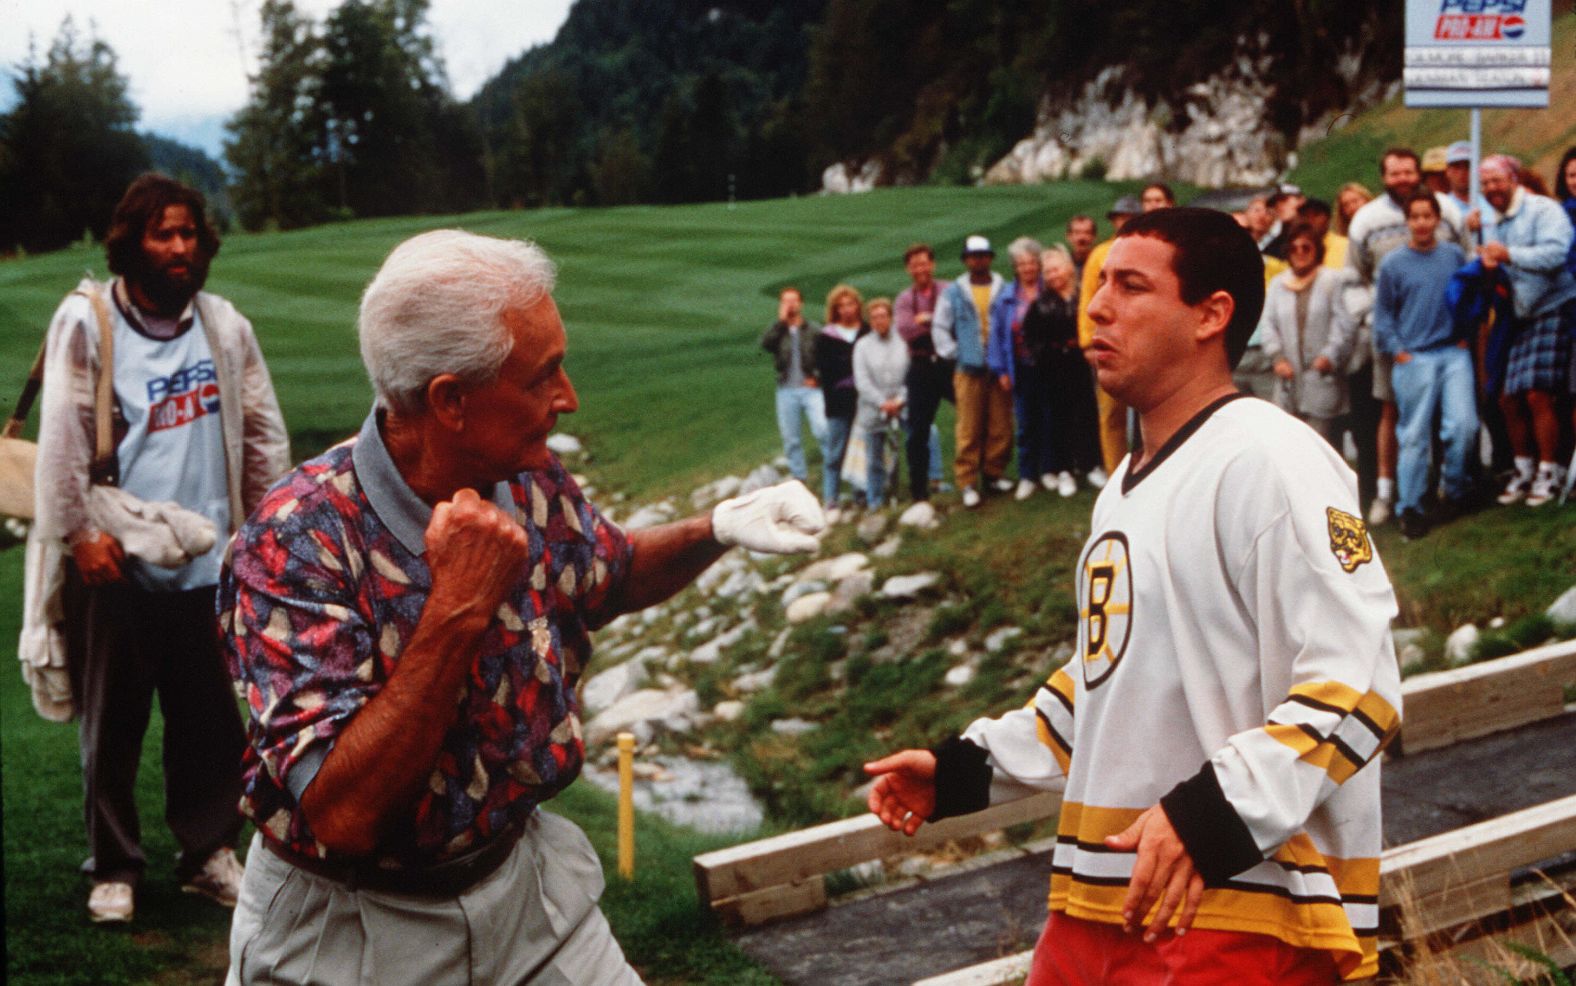 Sandler famously sparred with game-show host Bob Barker in his 1996 film "Happy Gilmore."